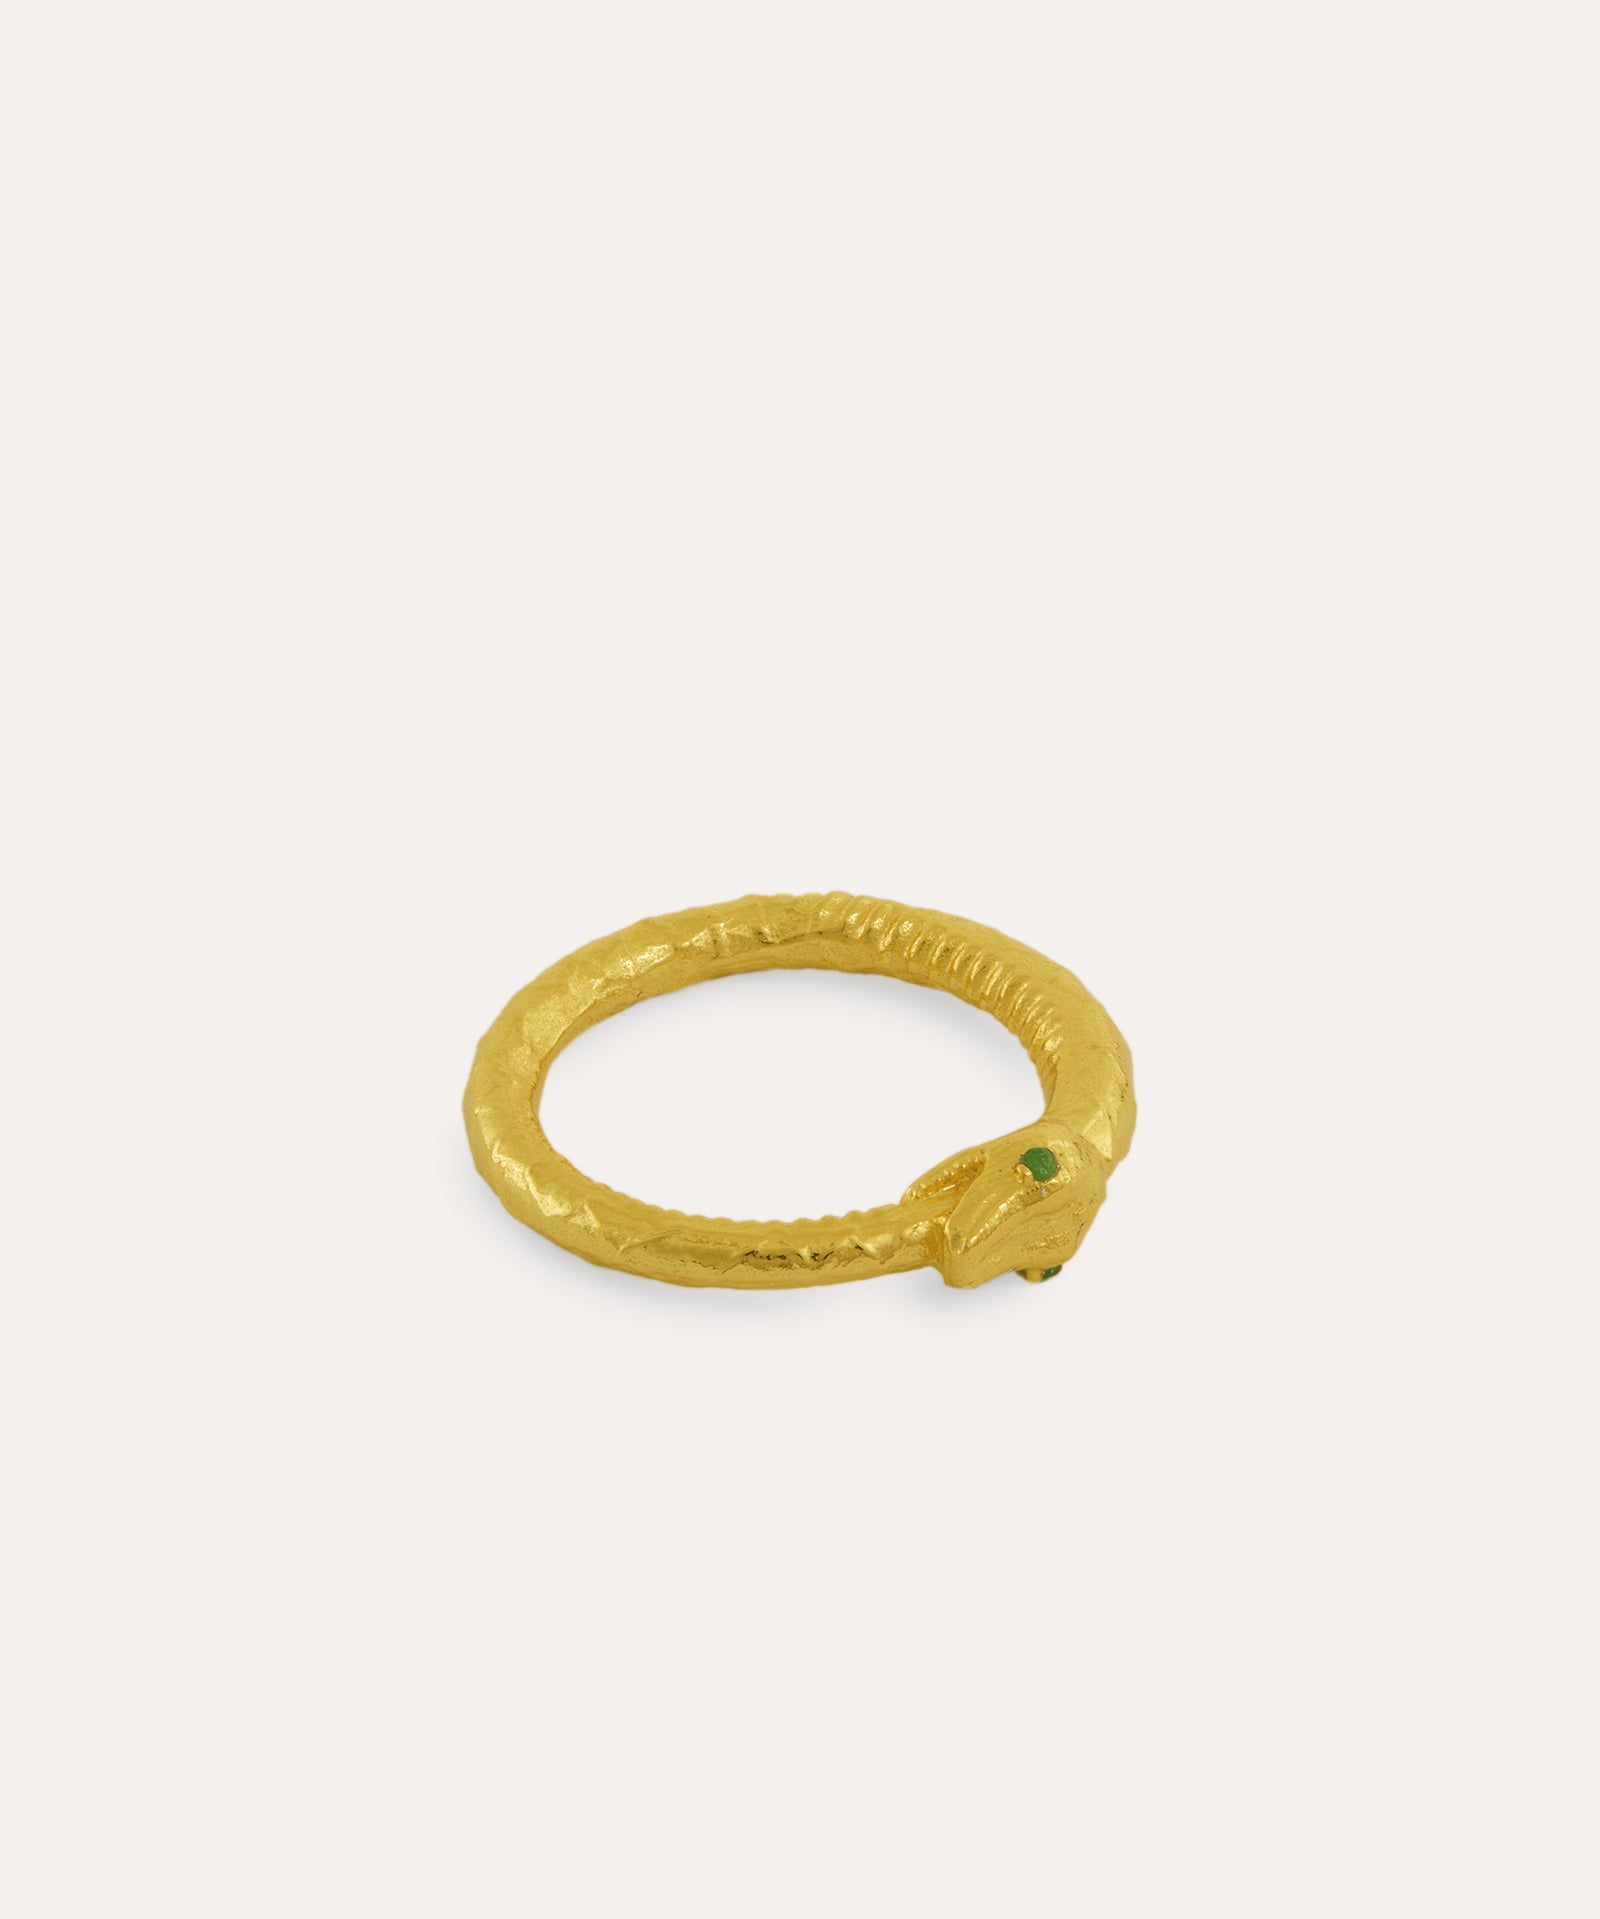 Rebirth Emerald Snake Ring | Sustainable Jewellery by Ottoman Hands